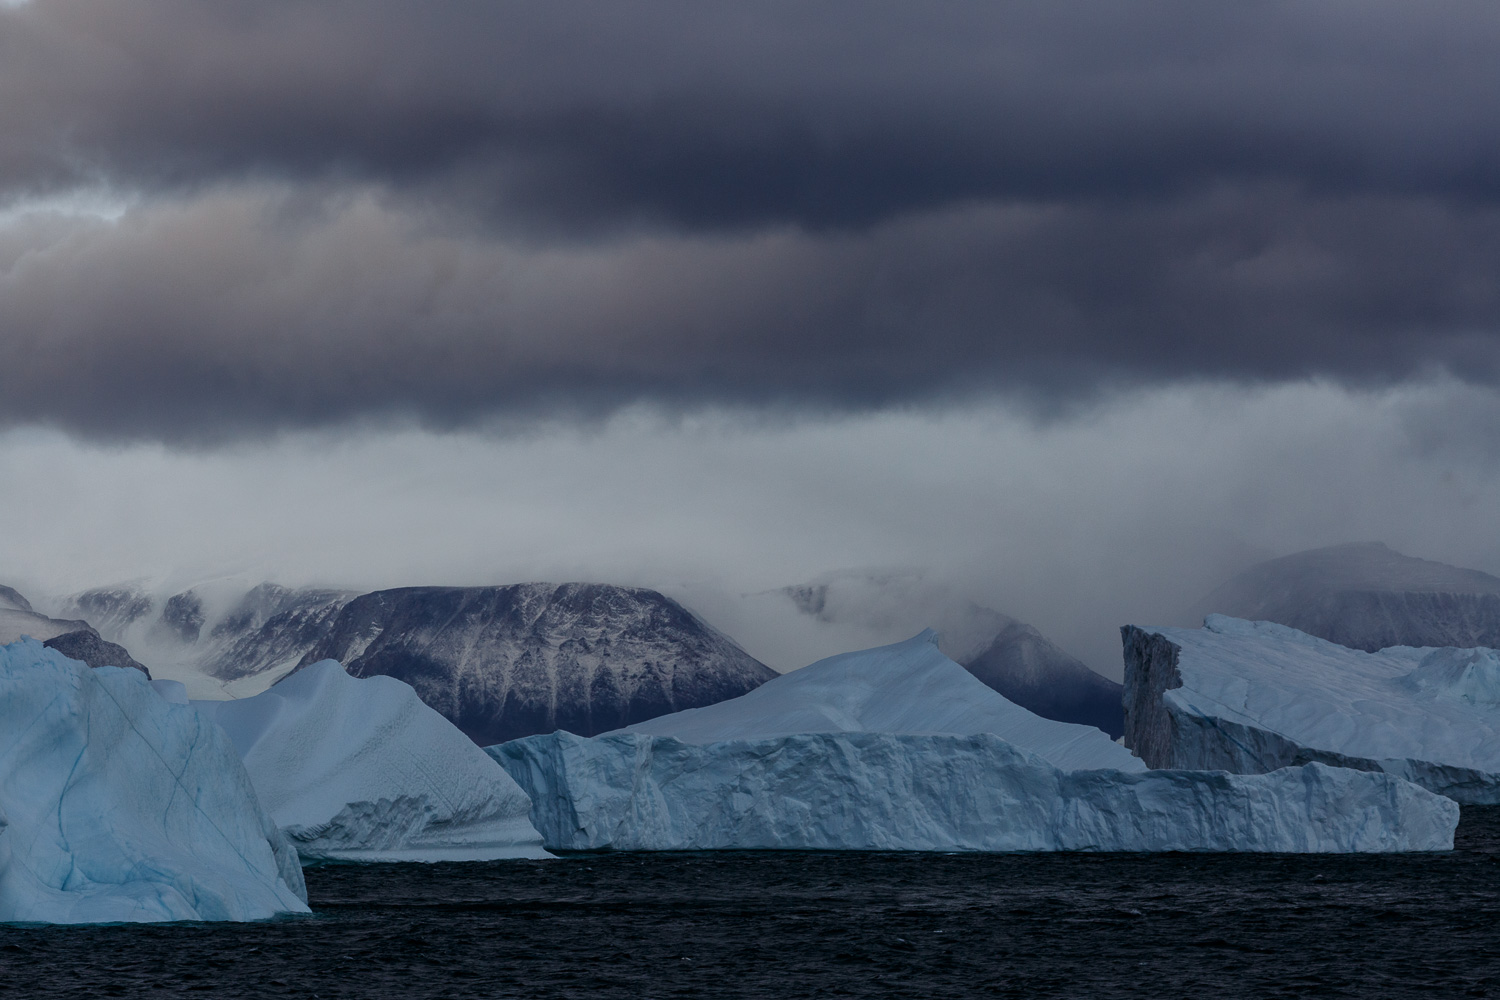 Icebergs, Mountains and Cloudy Skies